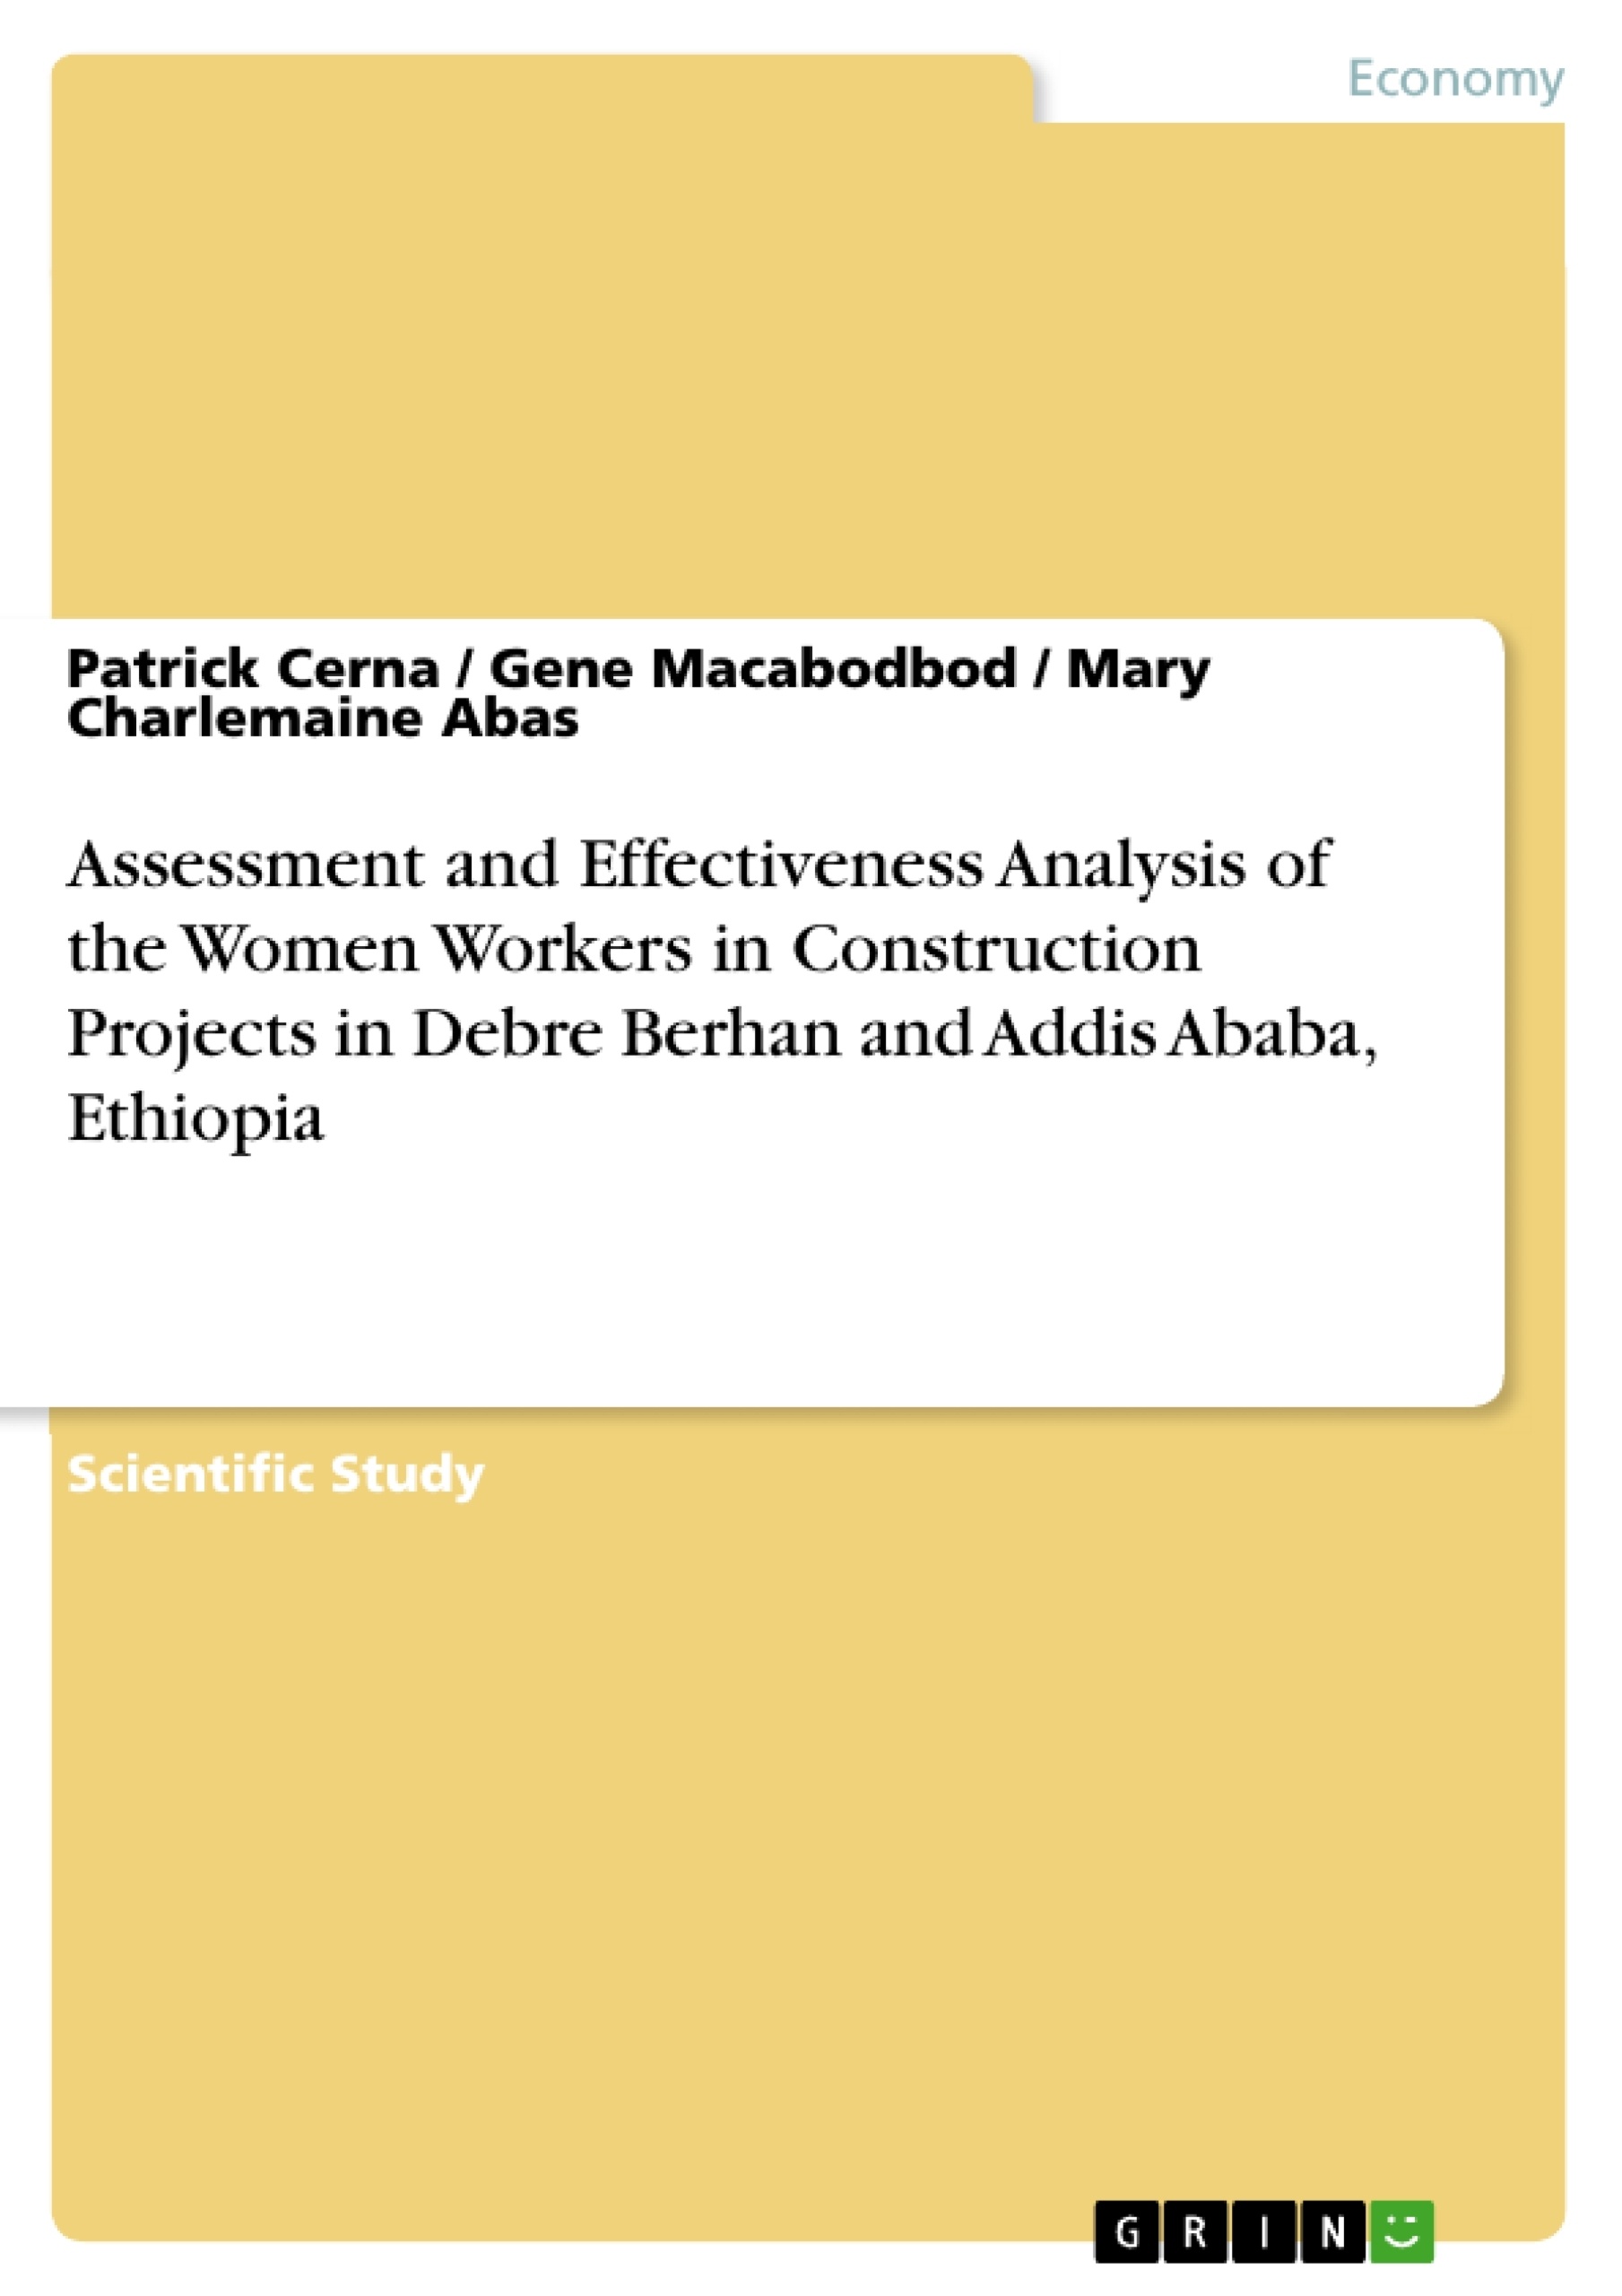 Title: Assessment and Effectiveness Analysis of the Women Workers in Construction Projects in Debre Berhan and Addis Ababa, Ethiopia